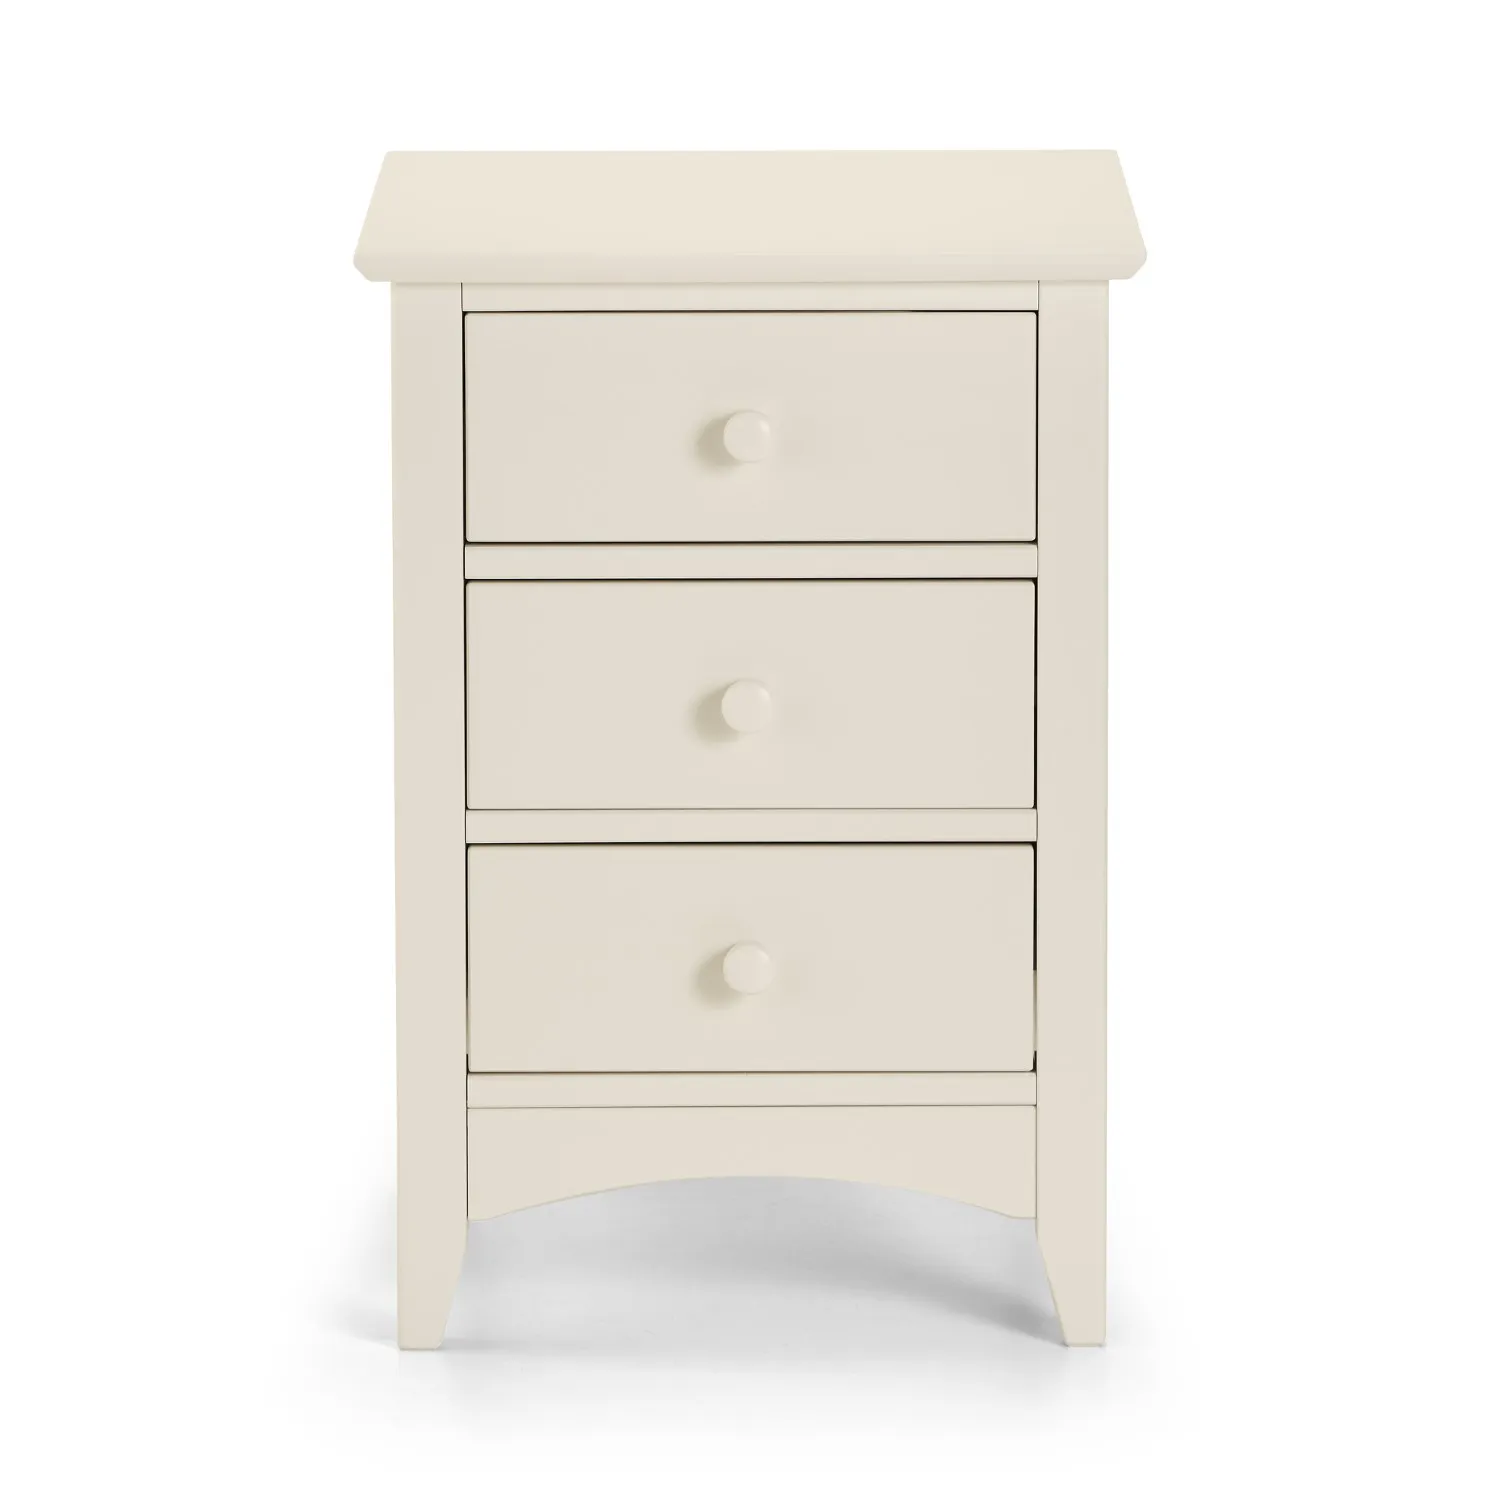 Stone White 3 Drawer Bedside Chest